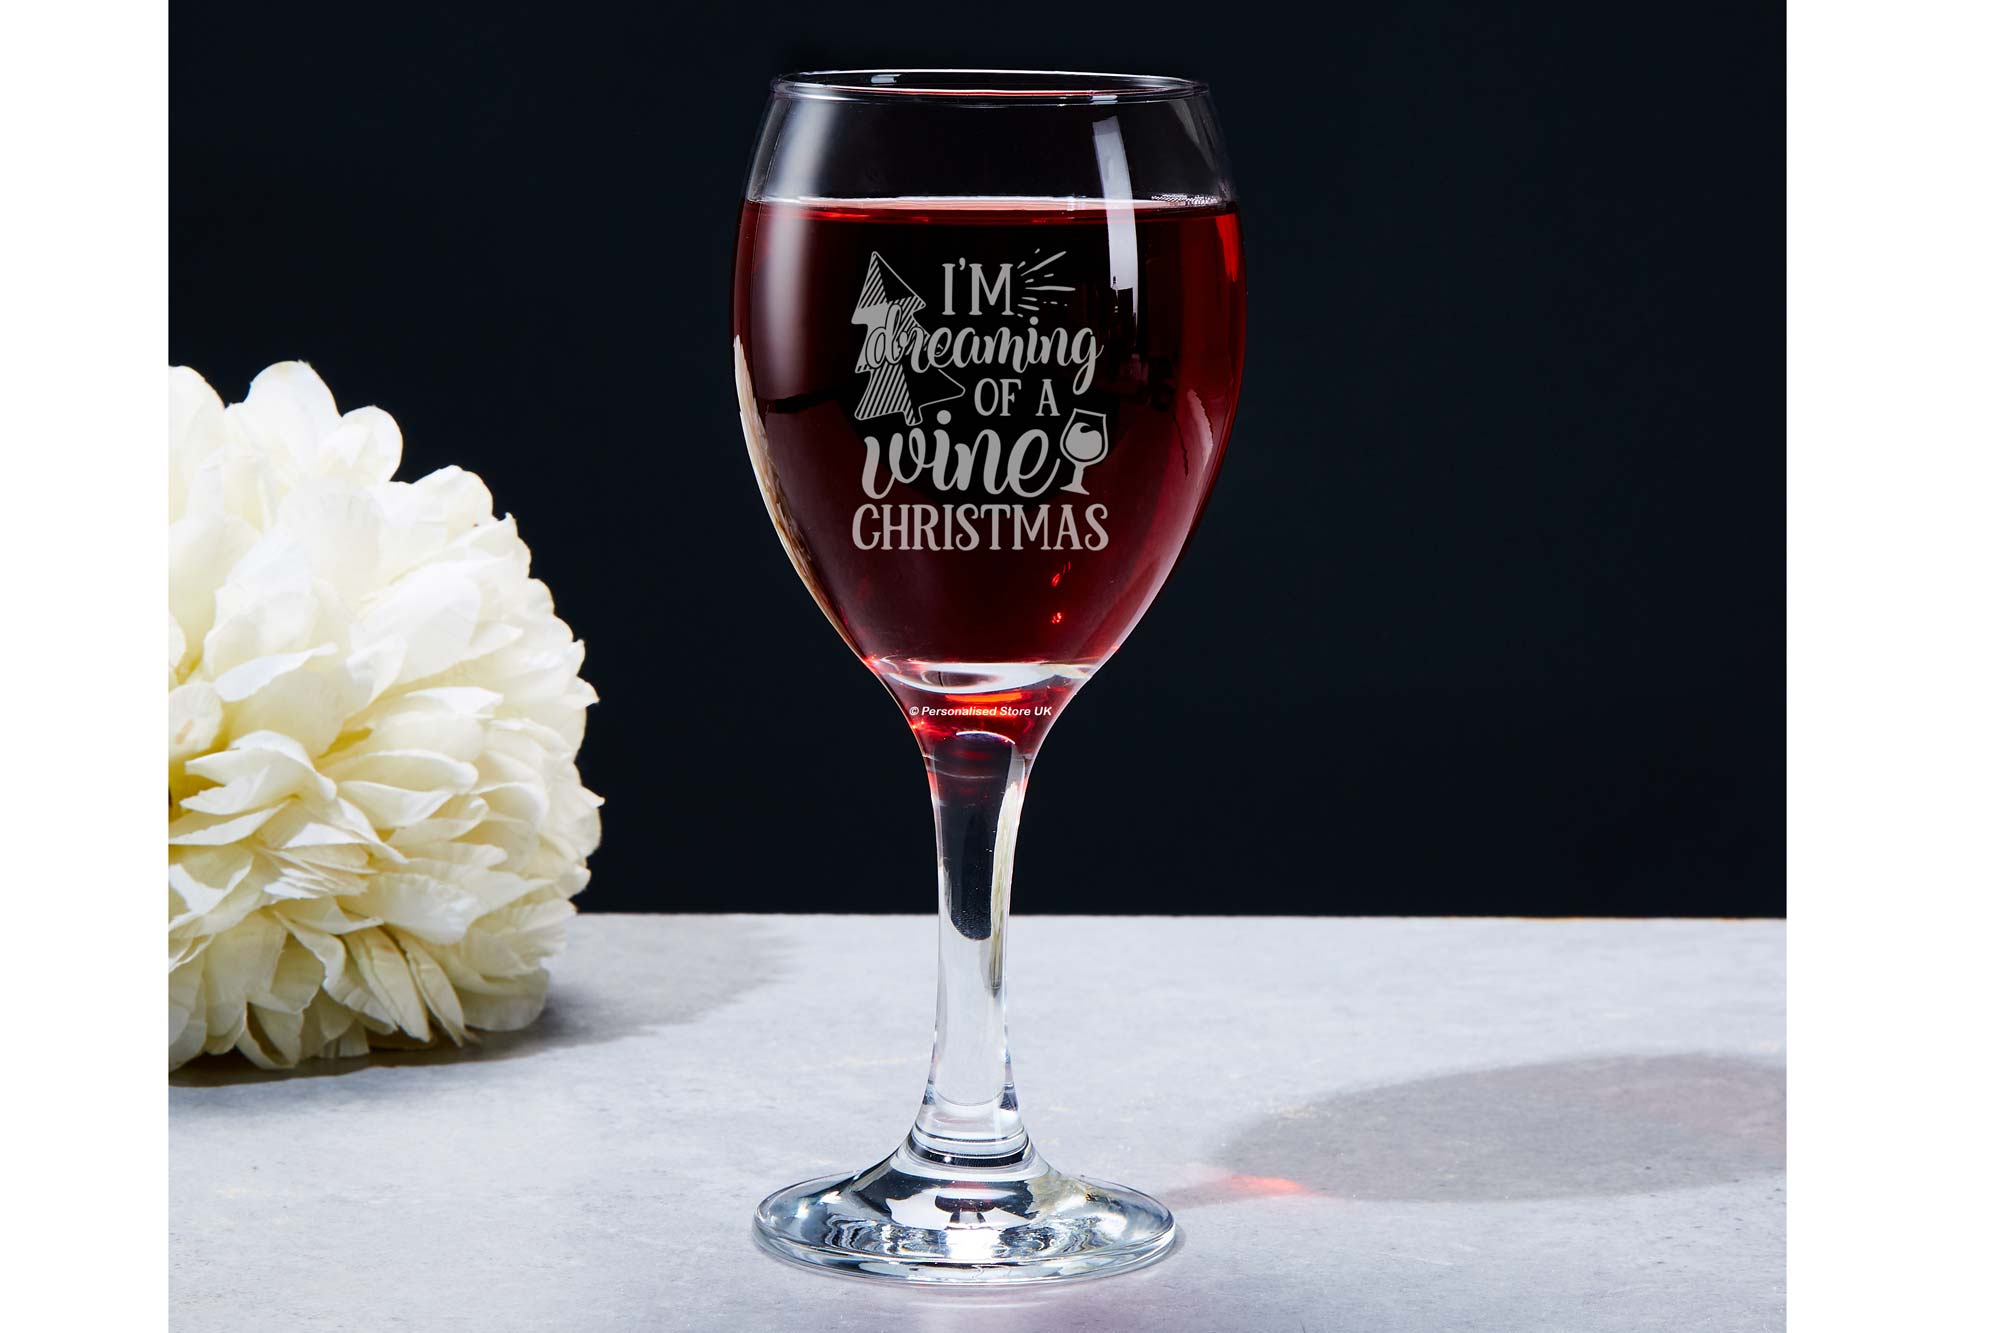 He sees you when you're drinking. Wine glass for Secret Santa gift.